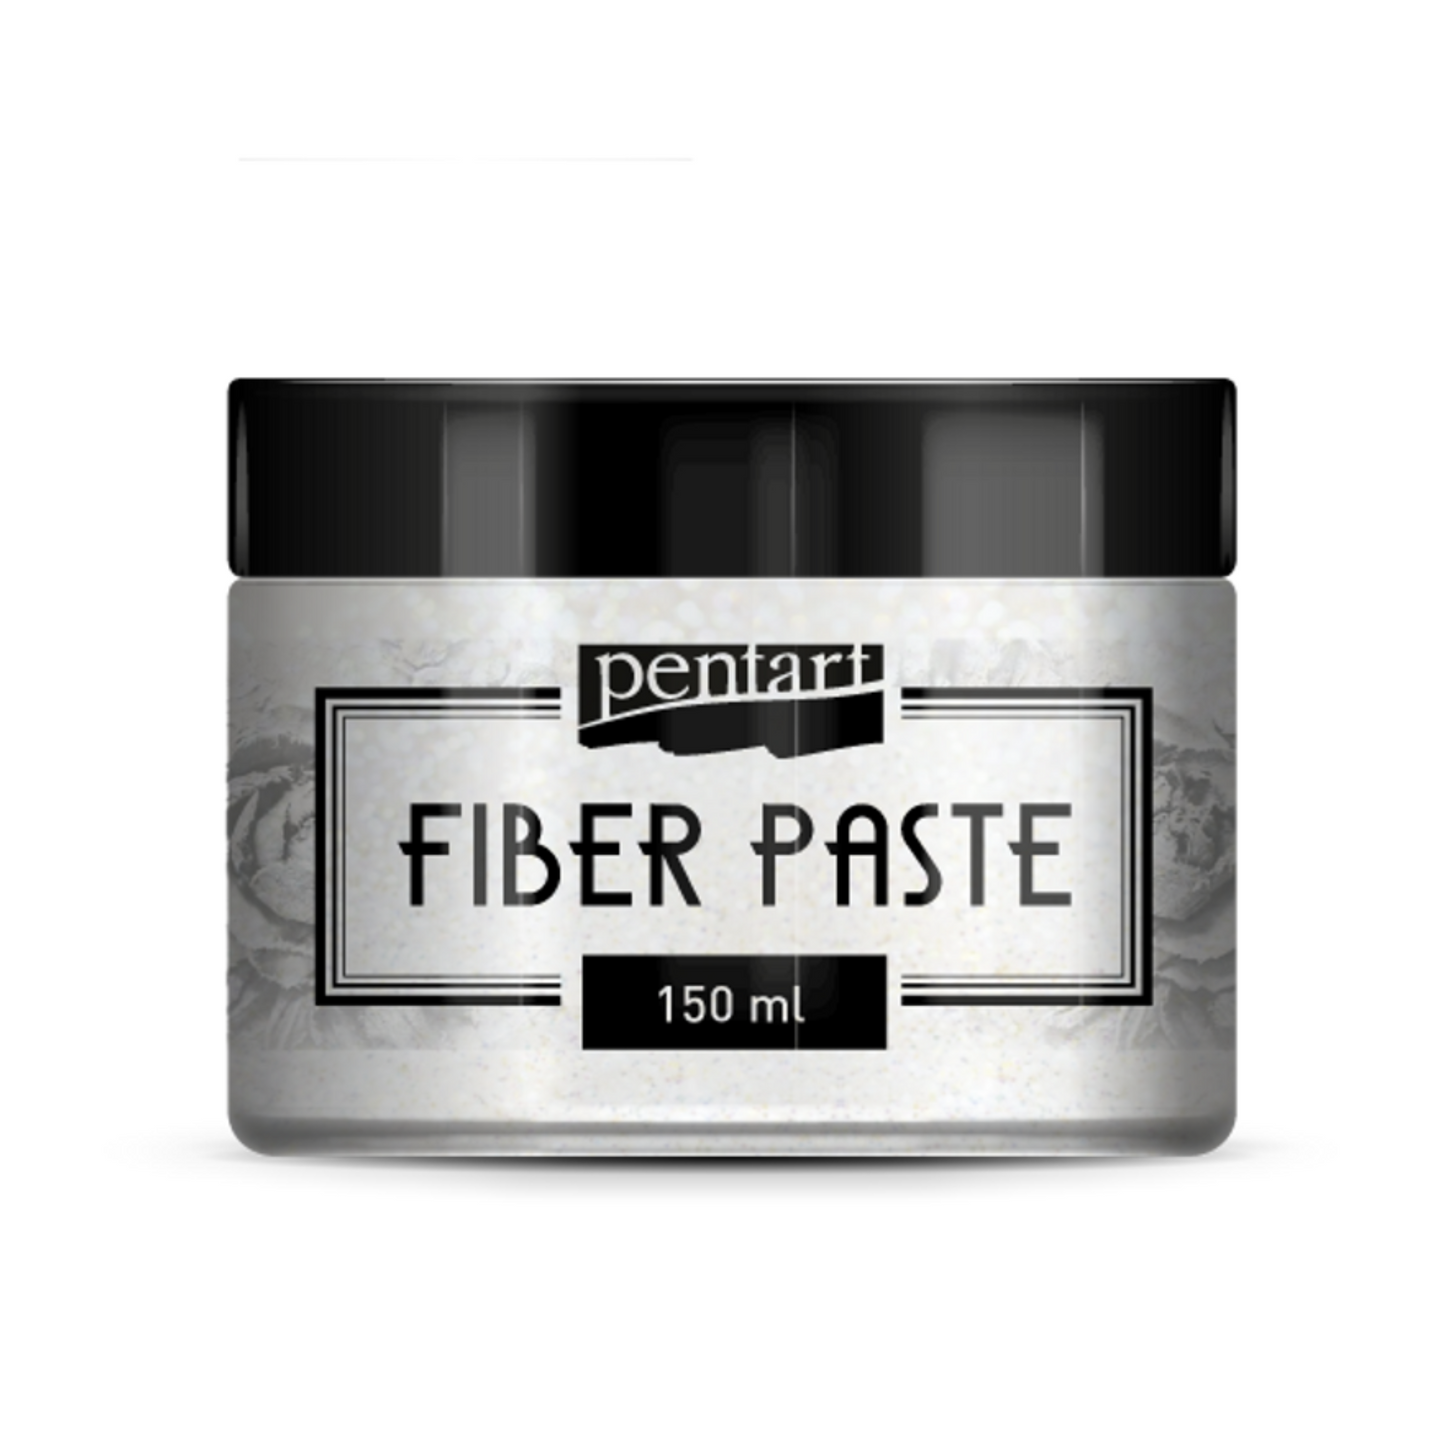 Fiber Paste by Pentart available at Milton's Daughter.